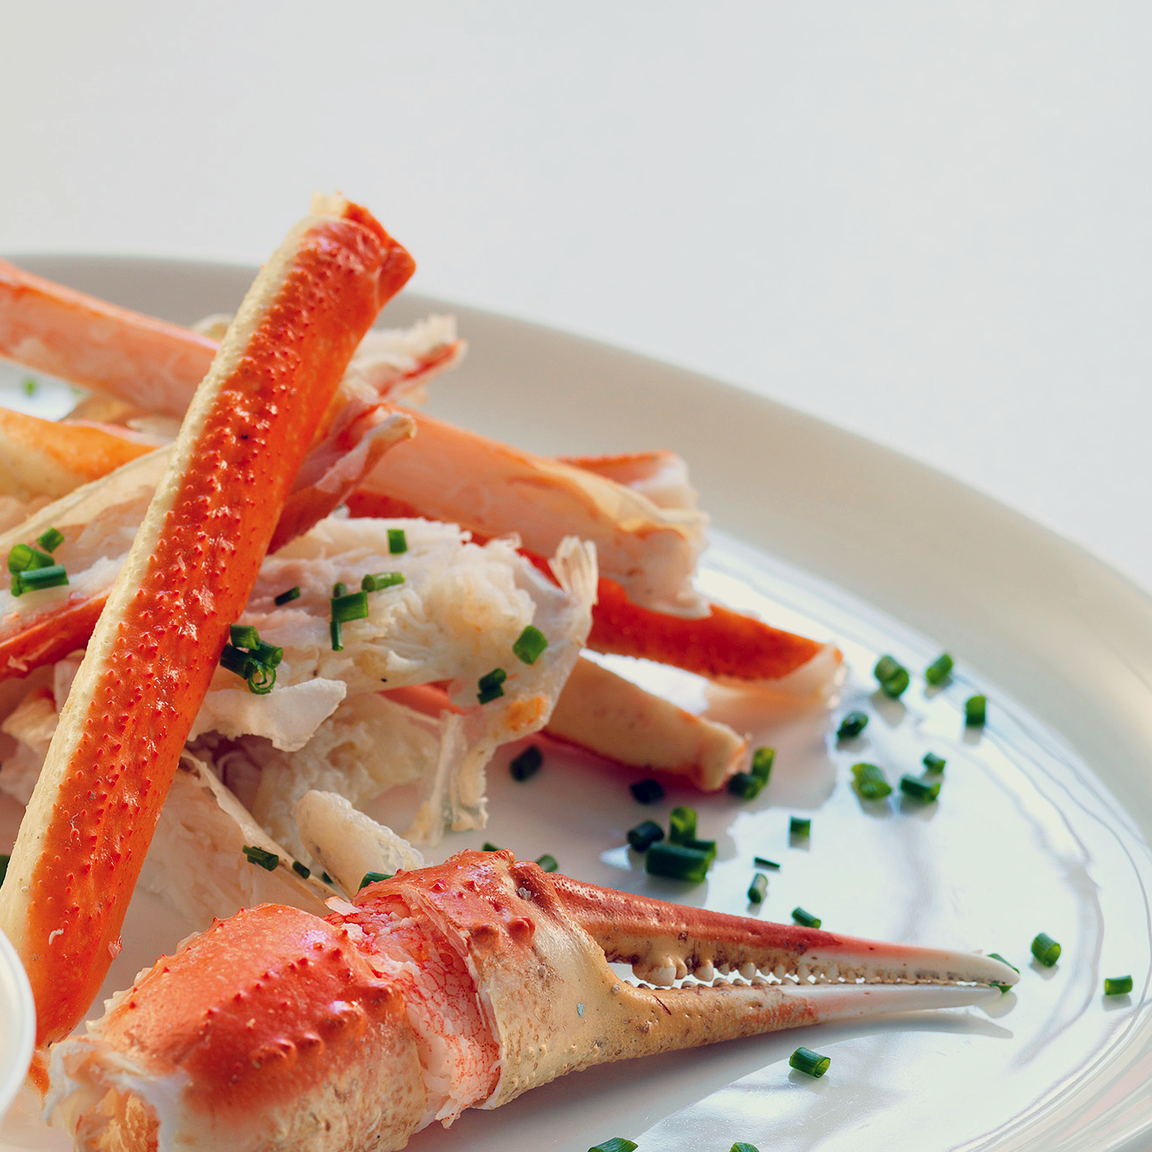 Snow crab - a sought-after delicacy